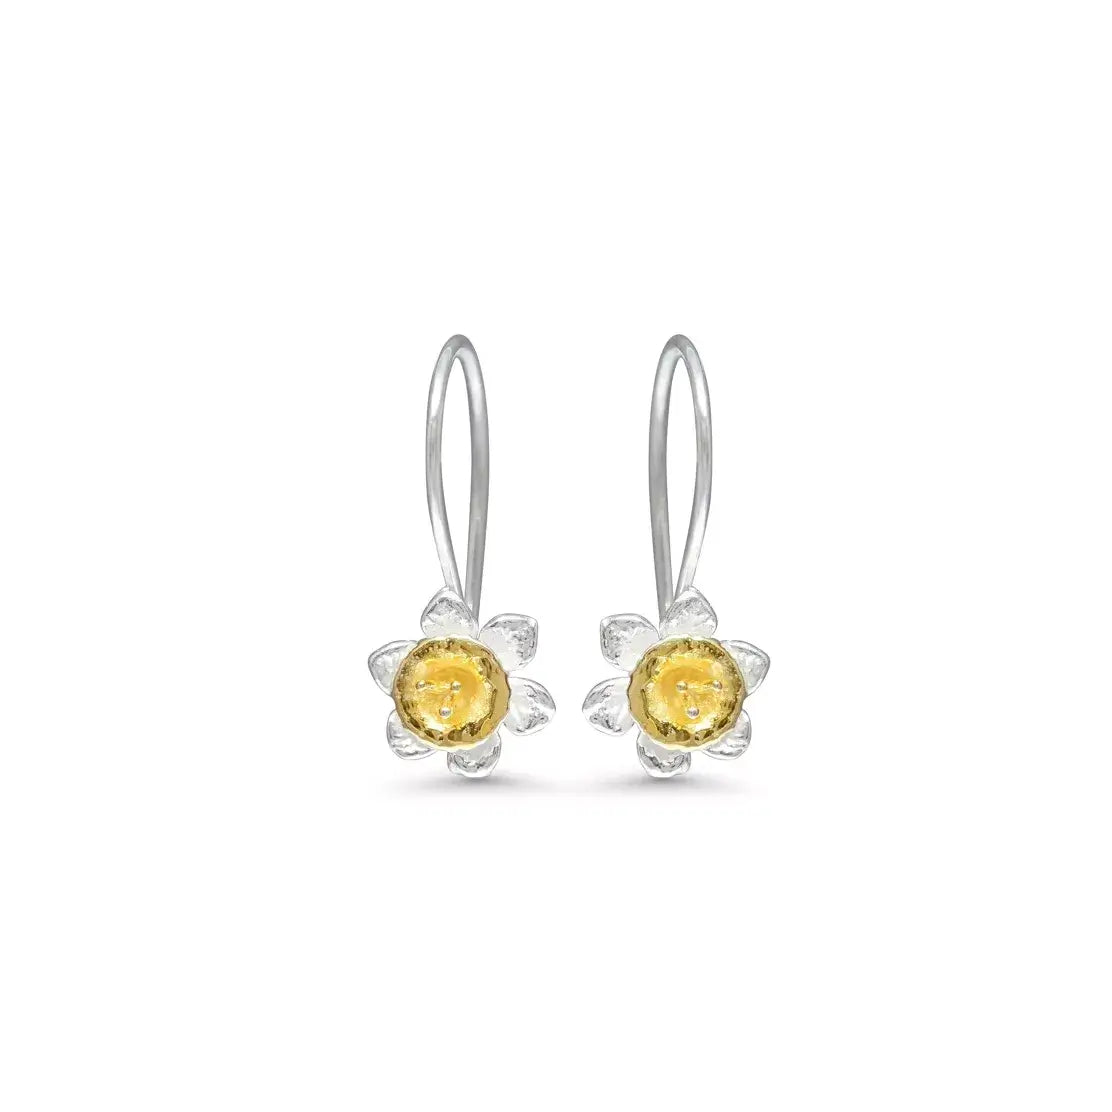 Daffodil Hook Earrings In Sterling Silver With 18 Carat Gold - Twelve Silver Trees